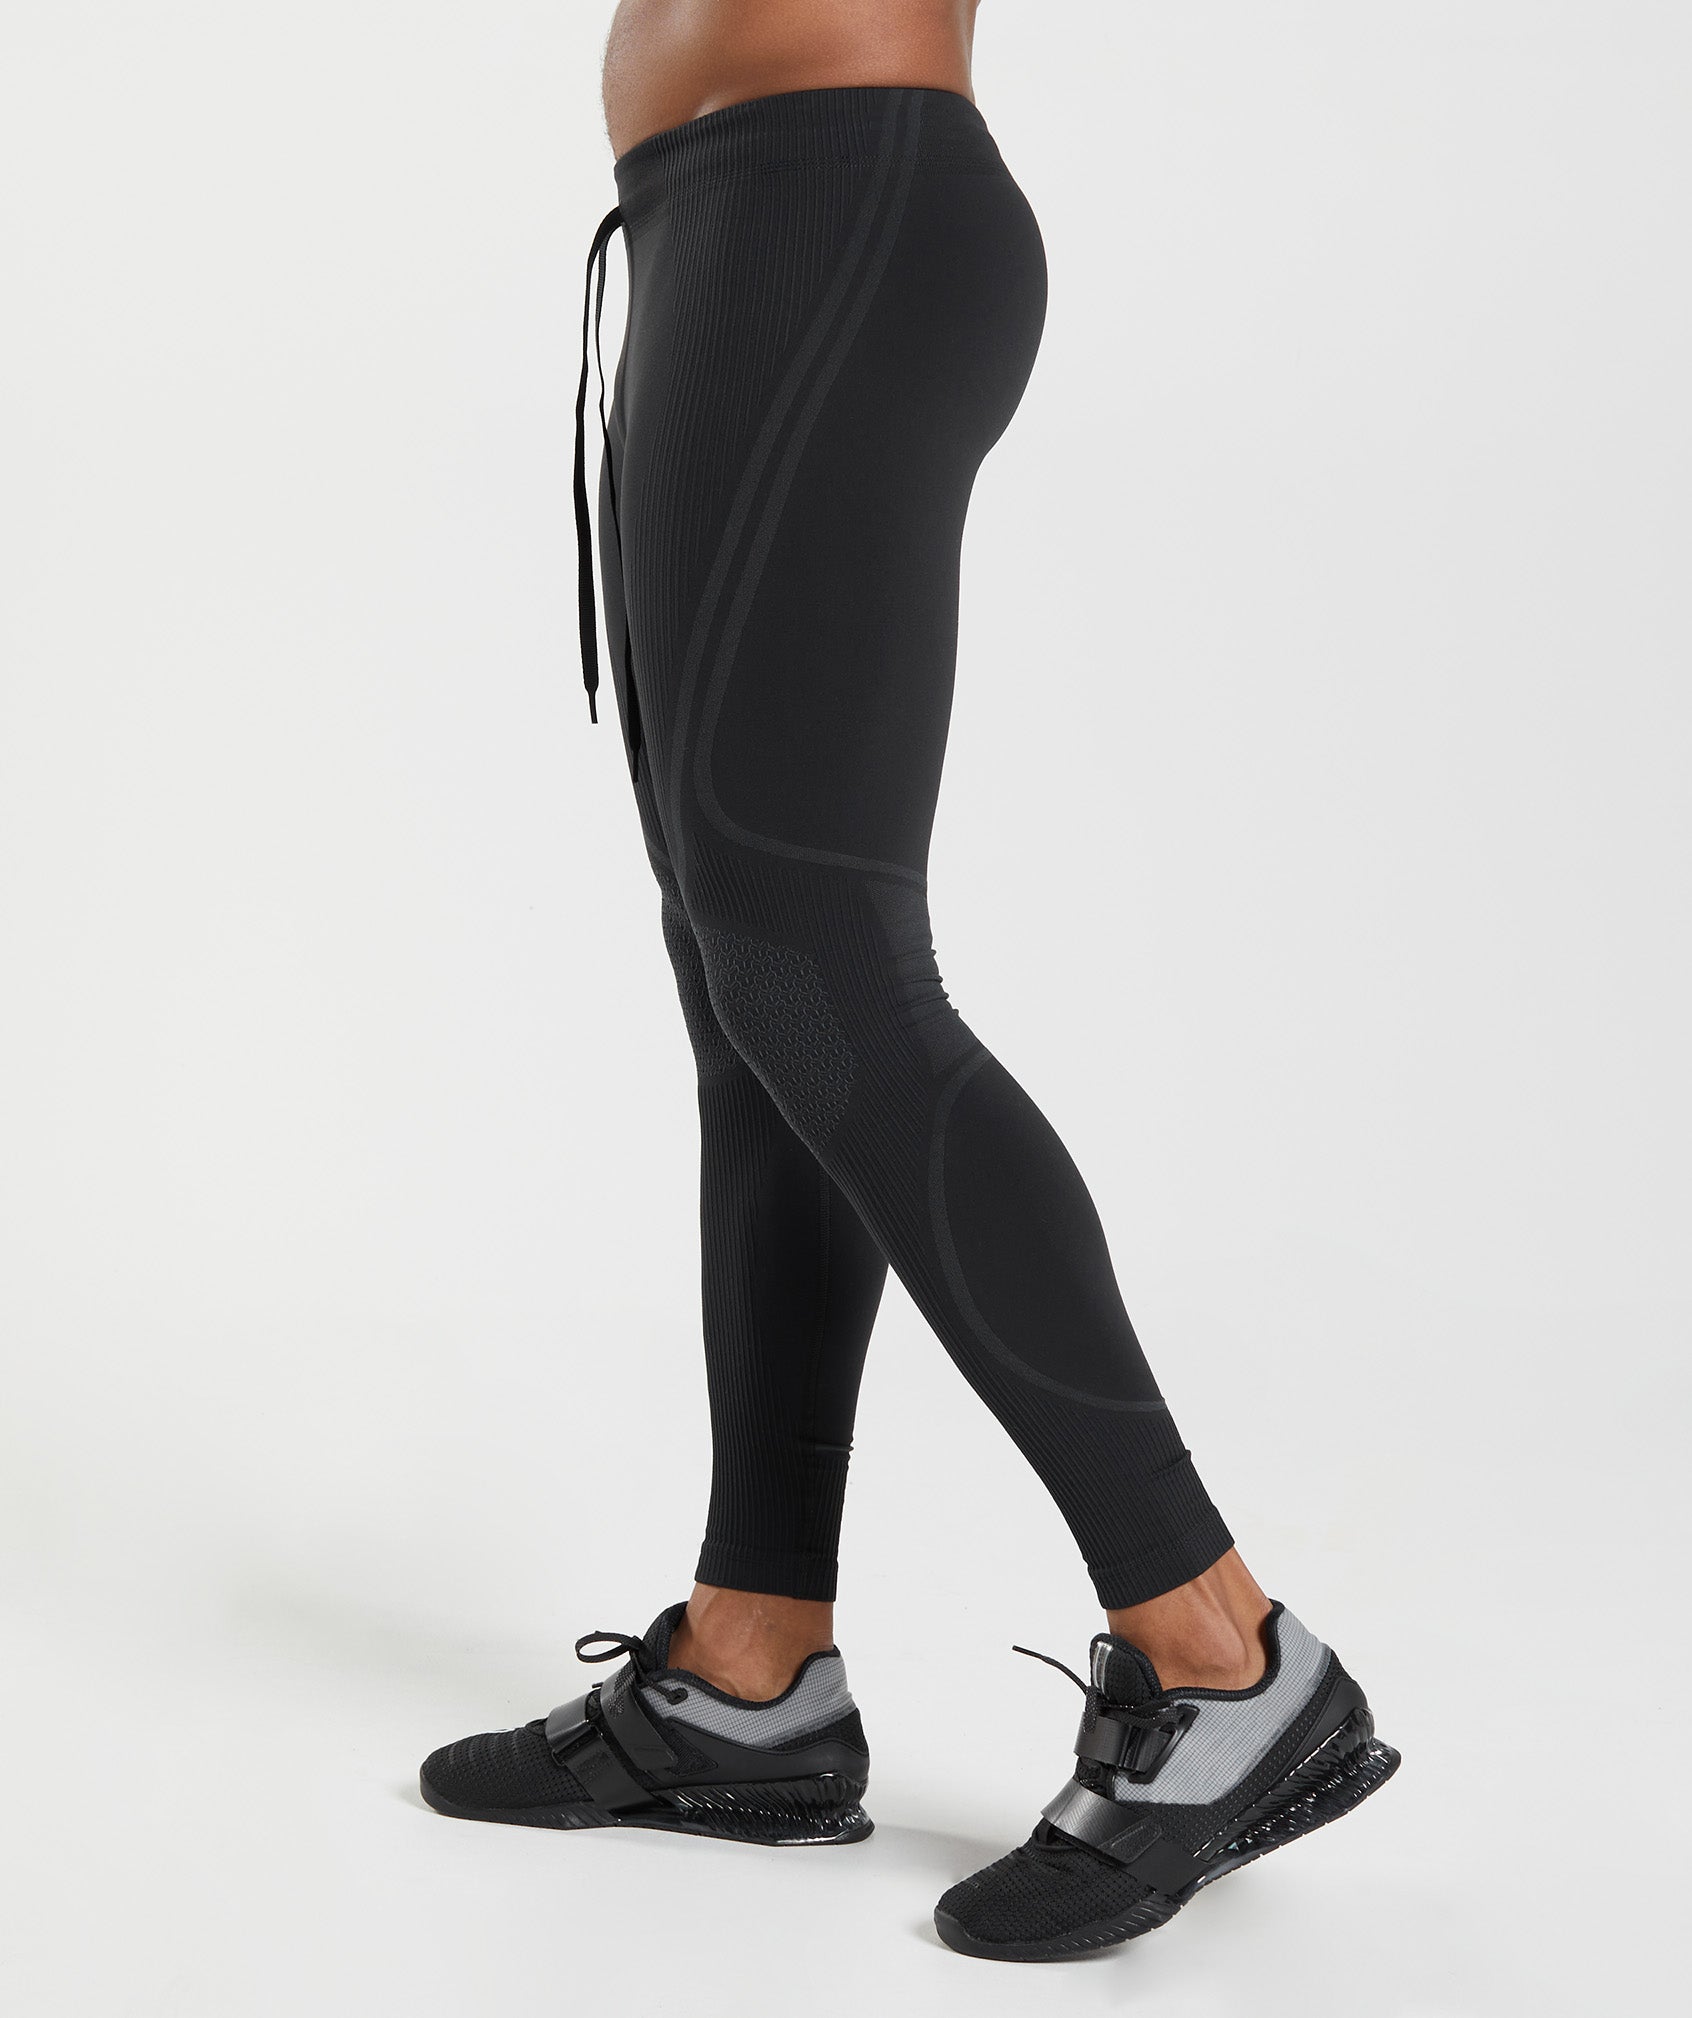 315 Seamless Tights in Black/Charcoal Grey - view 3